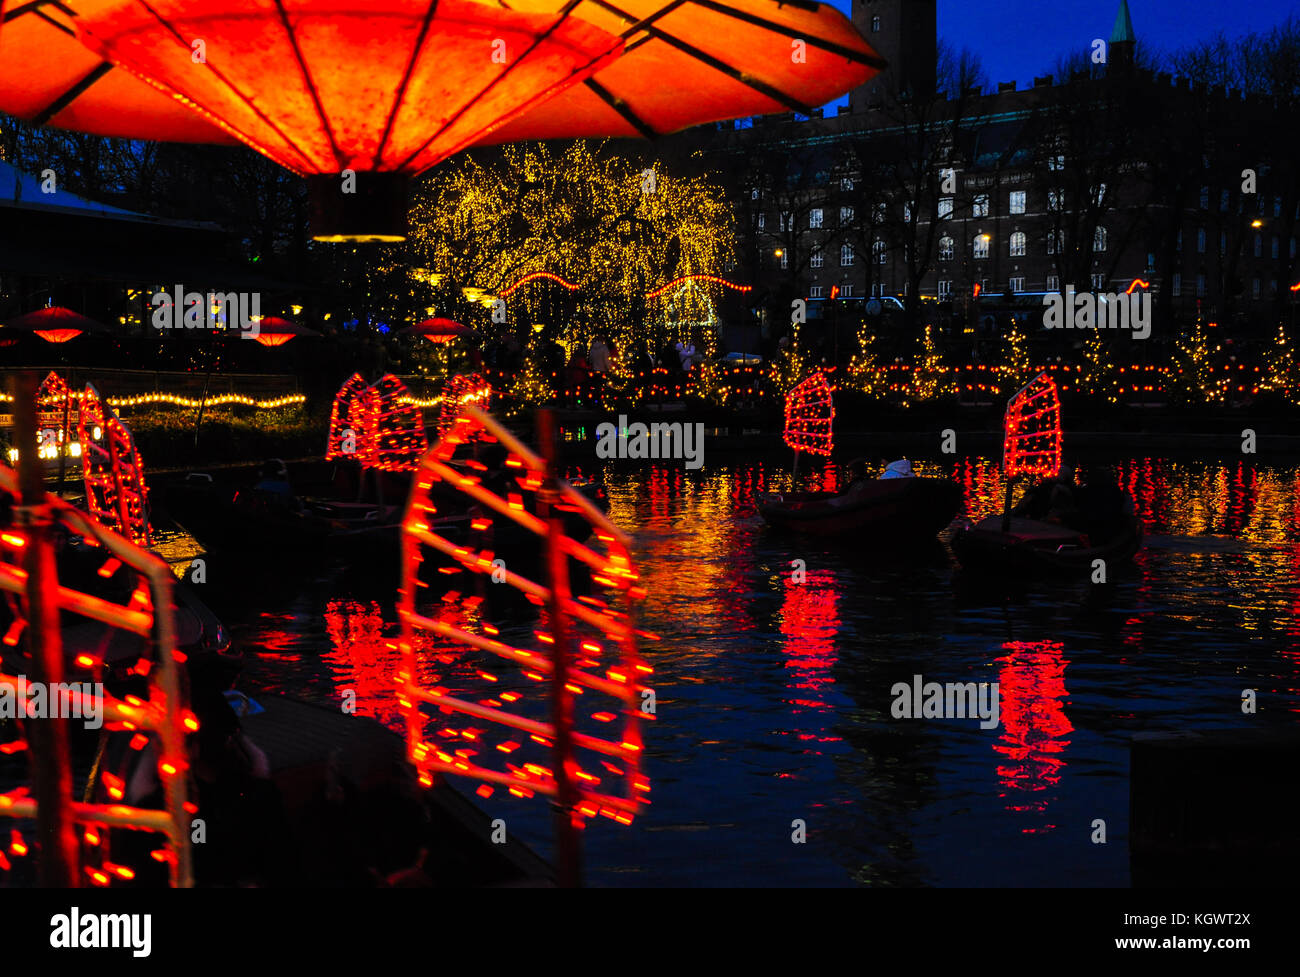 Pedal boats illuminated with red lights at Christmas Stock Photo